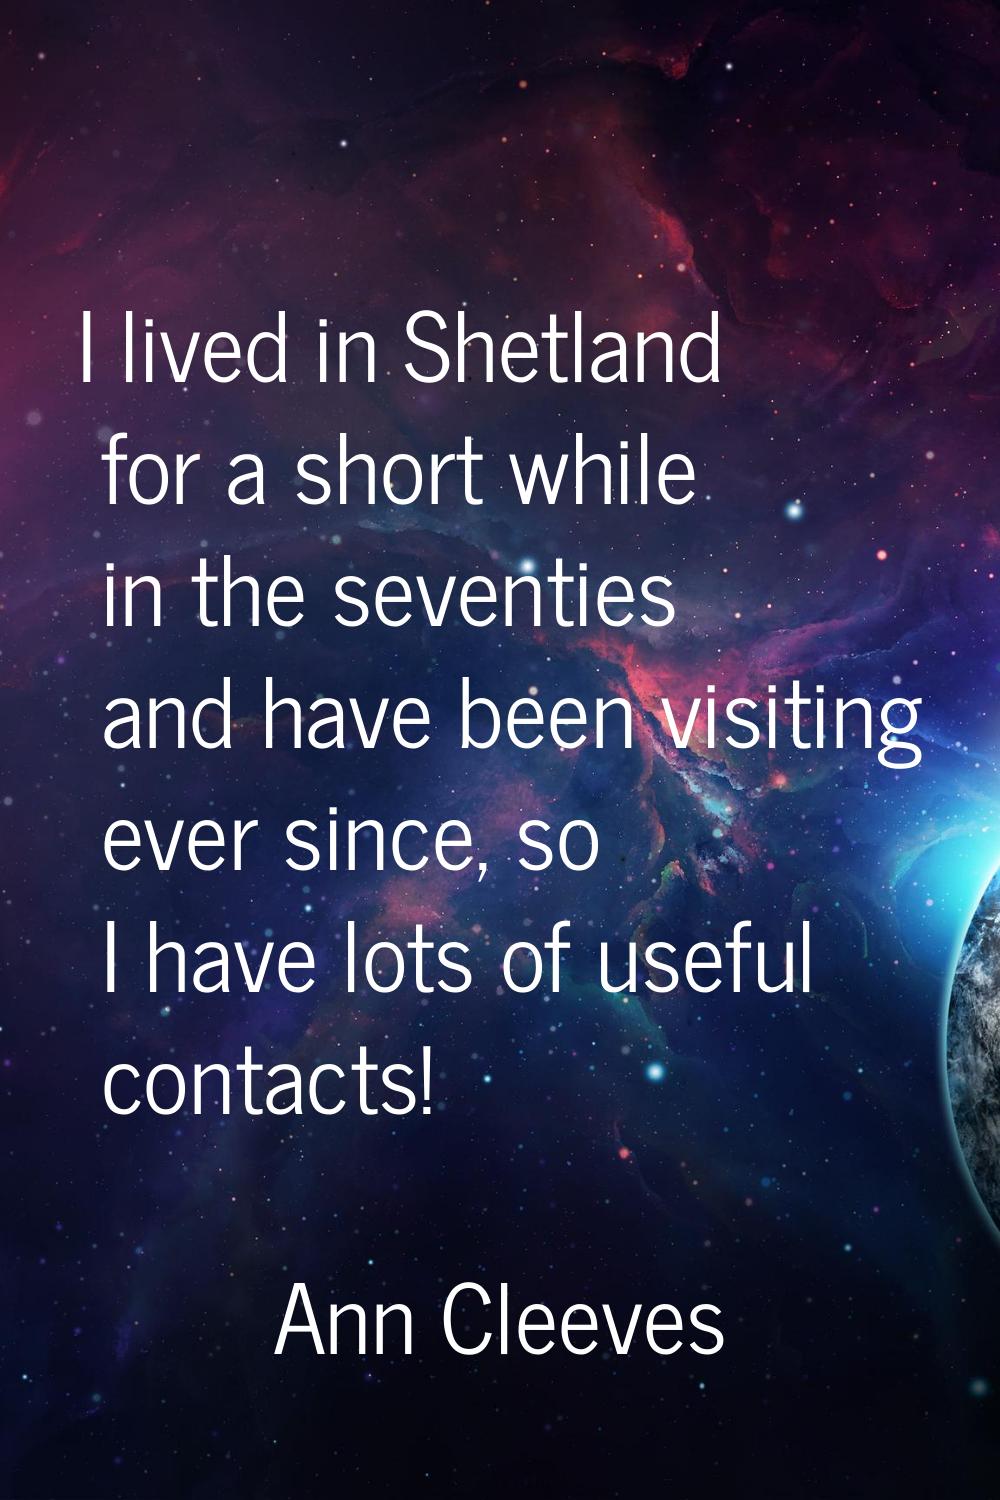 I lived in Shetland for a short while in the seventies and have been visiting ever since, so I have